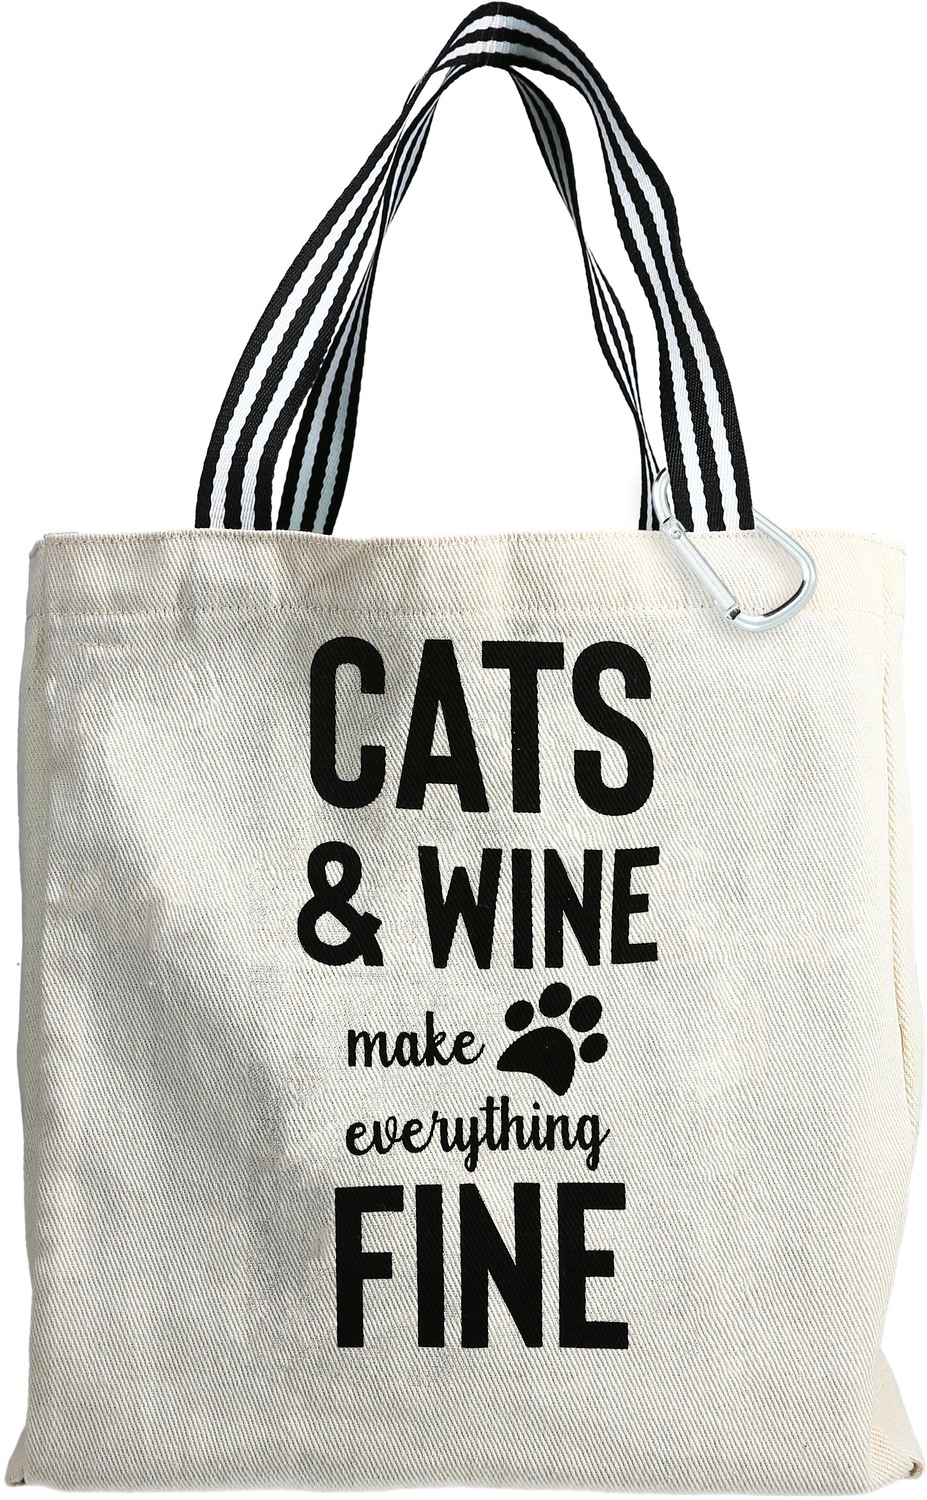 Cats & Wine by Check Me Out - Cats & Wine - 100% Cotton Twill Gift Bag